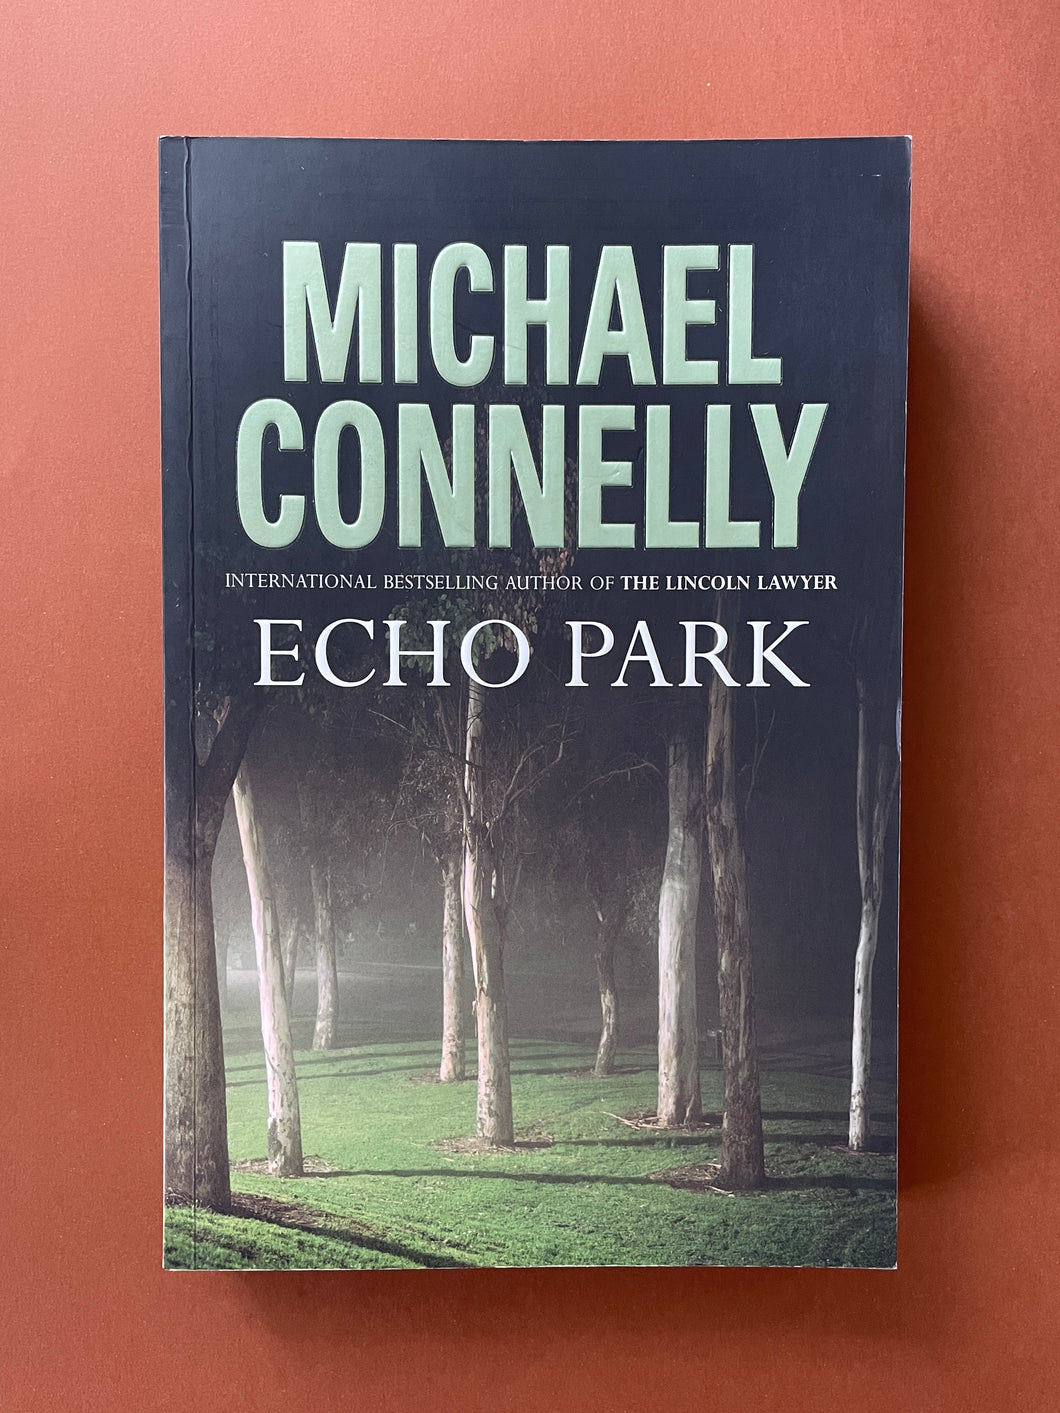 Echo Park by Michael Connelly: photo of the front cover.